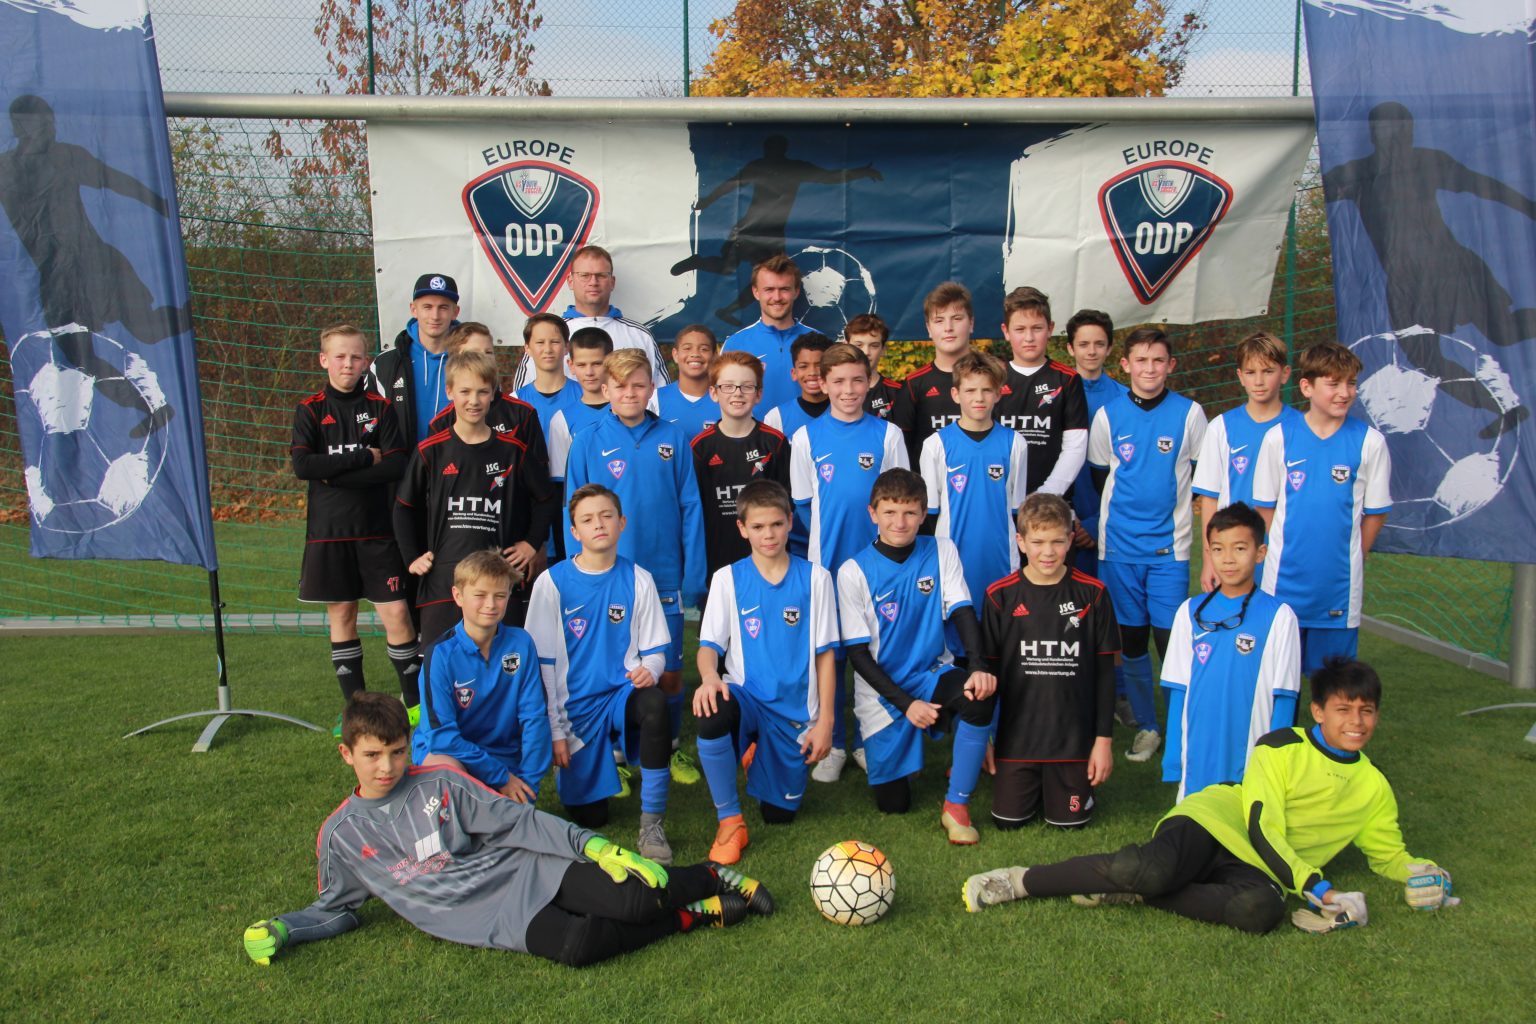 US YOUTH SOCCER EUROPE CAMP